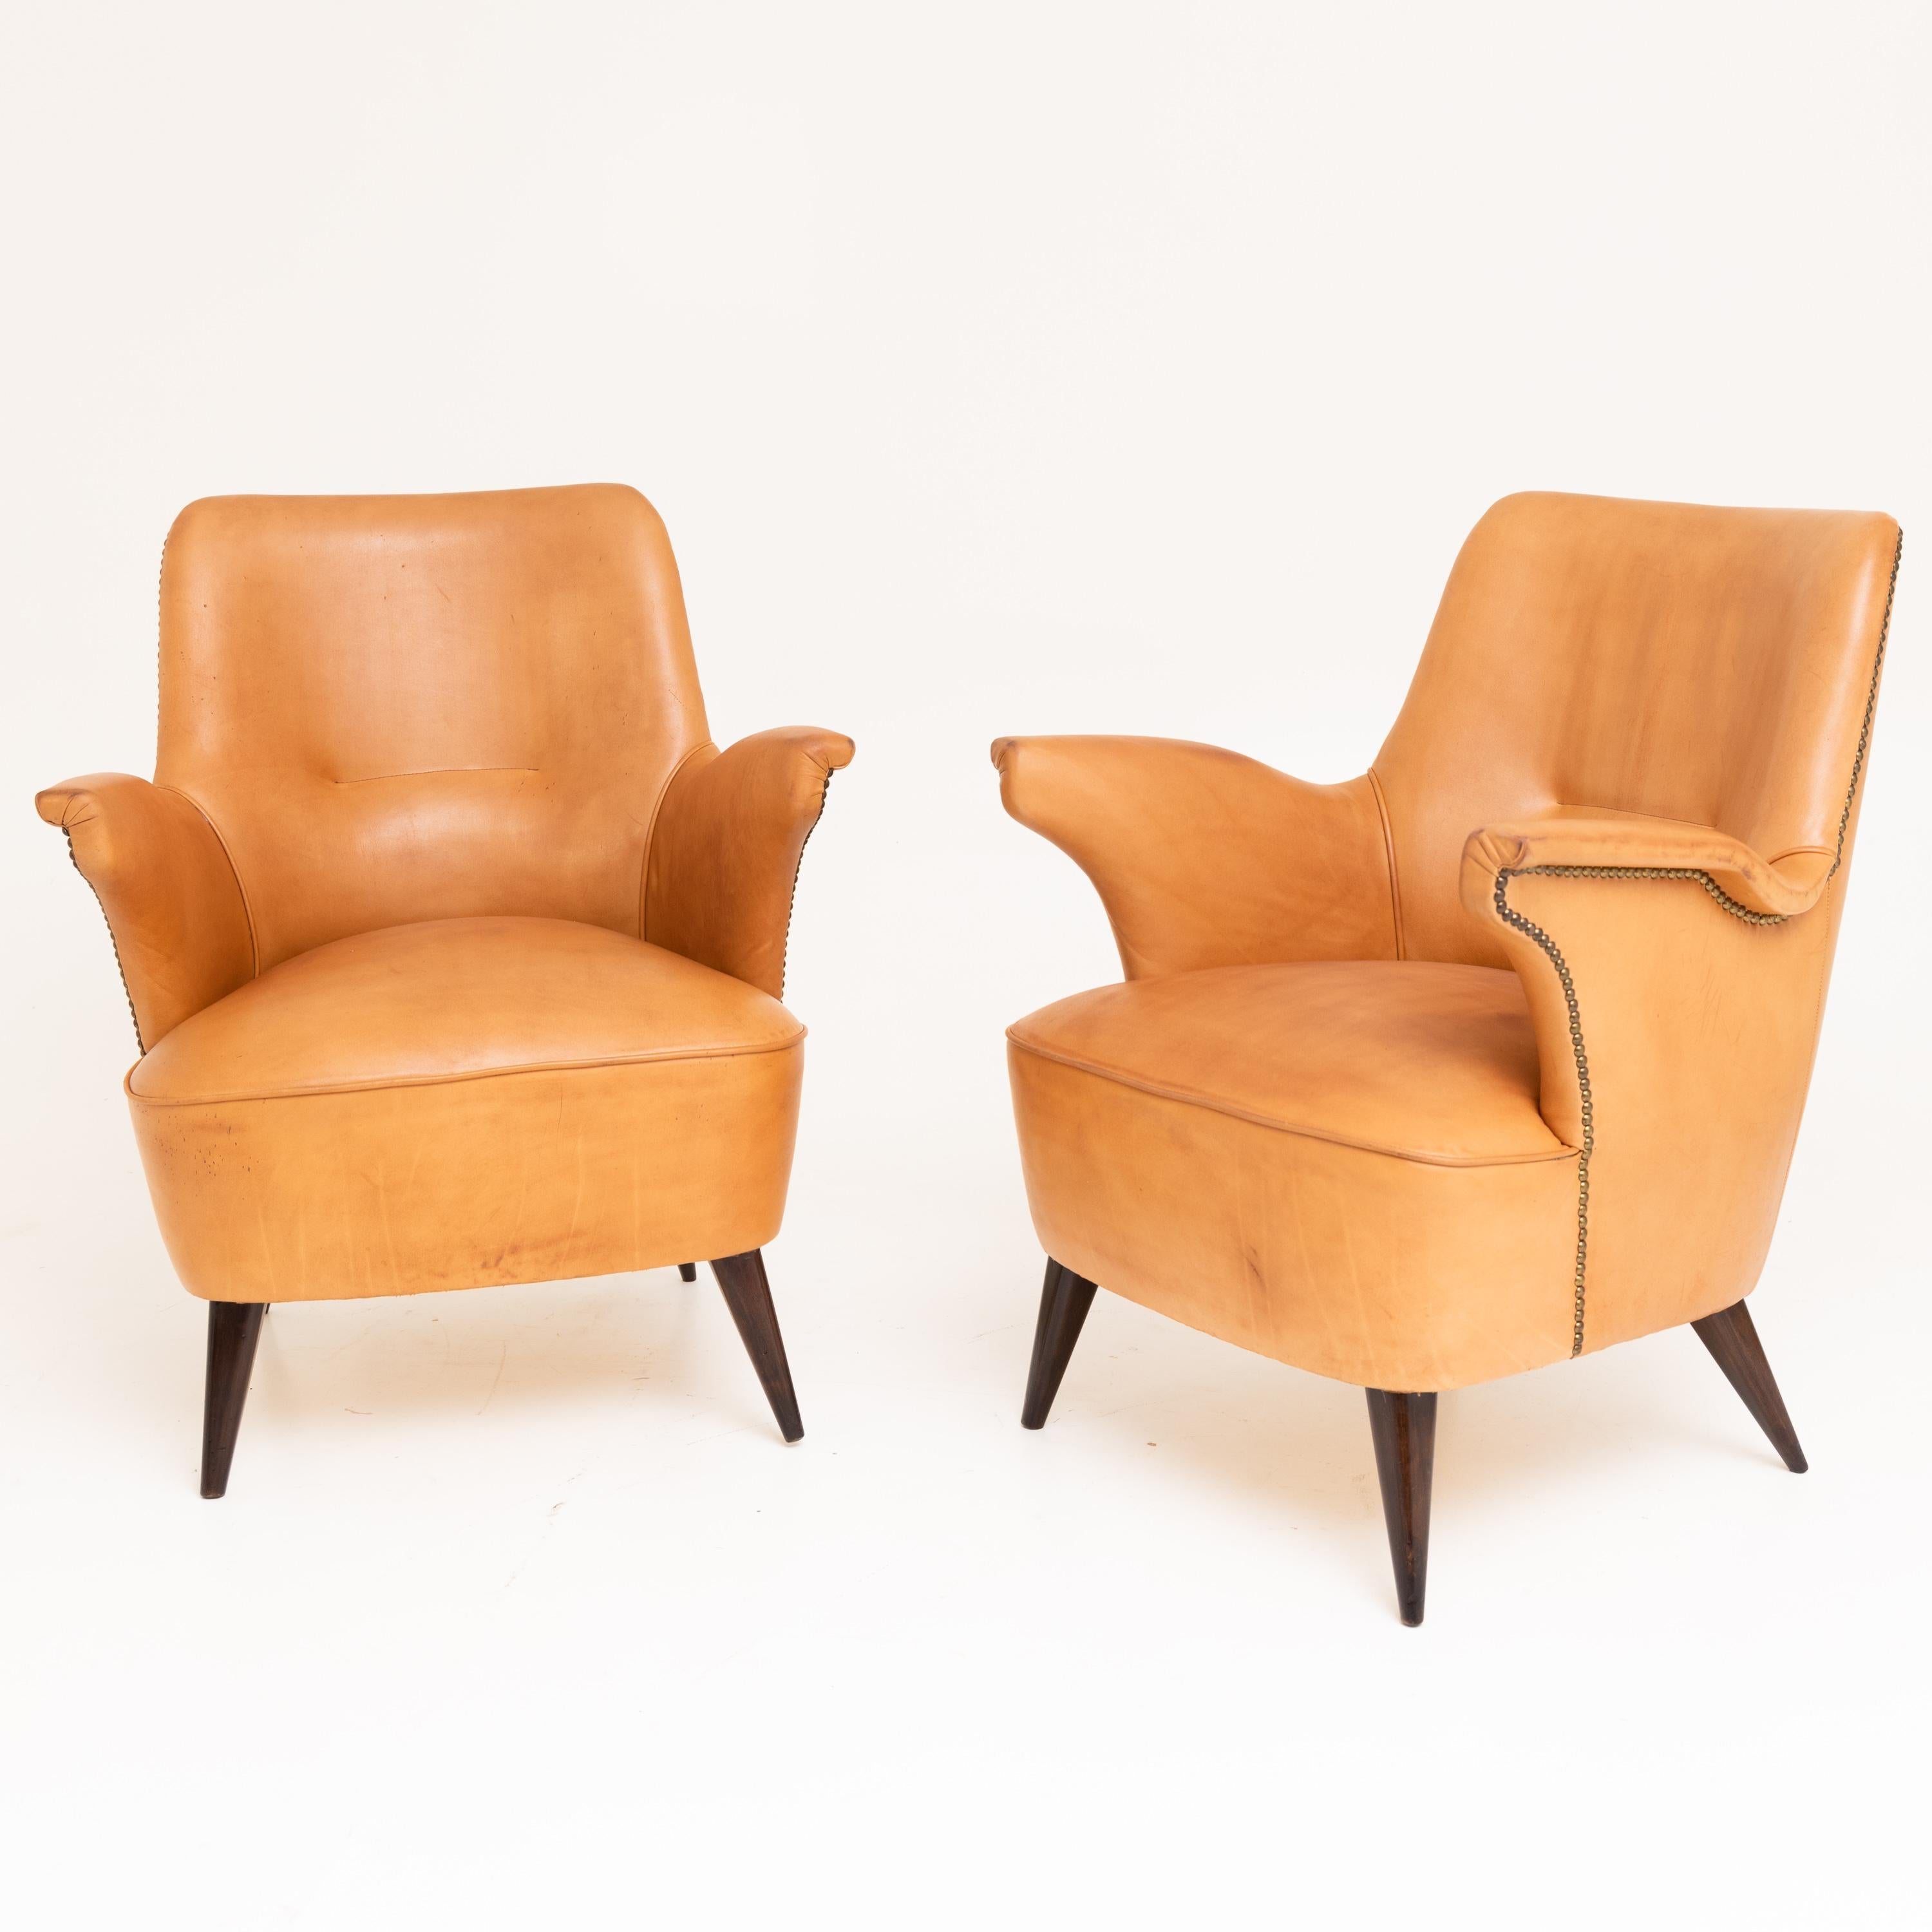 Mid-Century Modern Lounge Chairs, Attributed to Giovanni 'Nino' Zoncada, Italy, 1950s